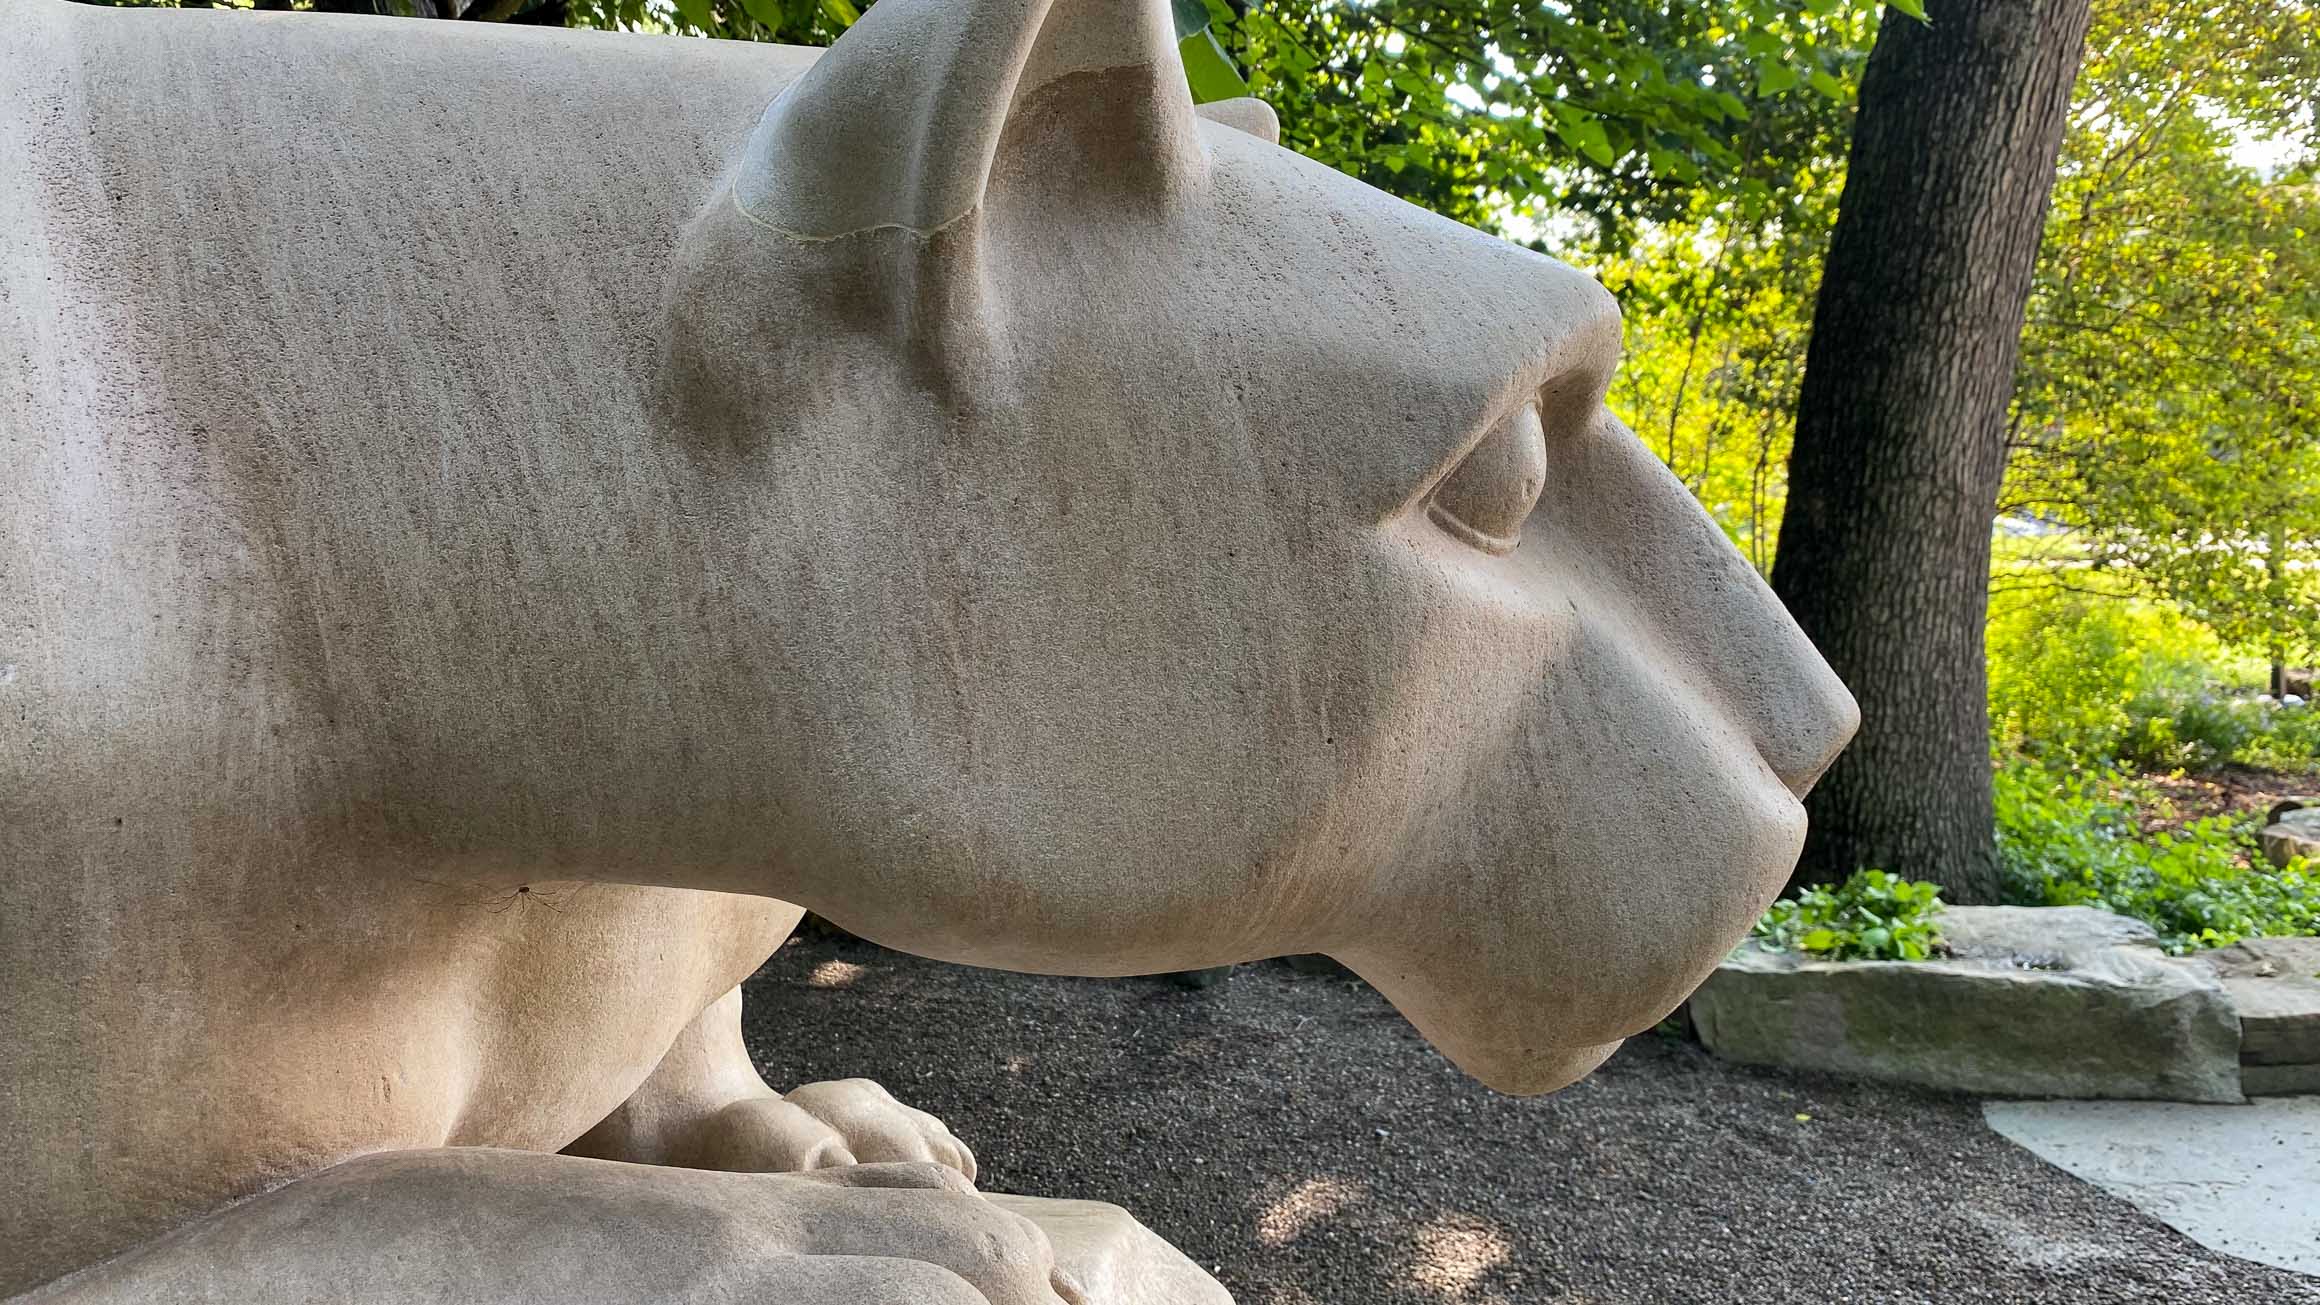 The Nittany Lion Shrine is seen from the side